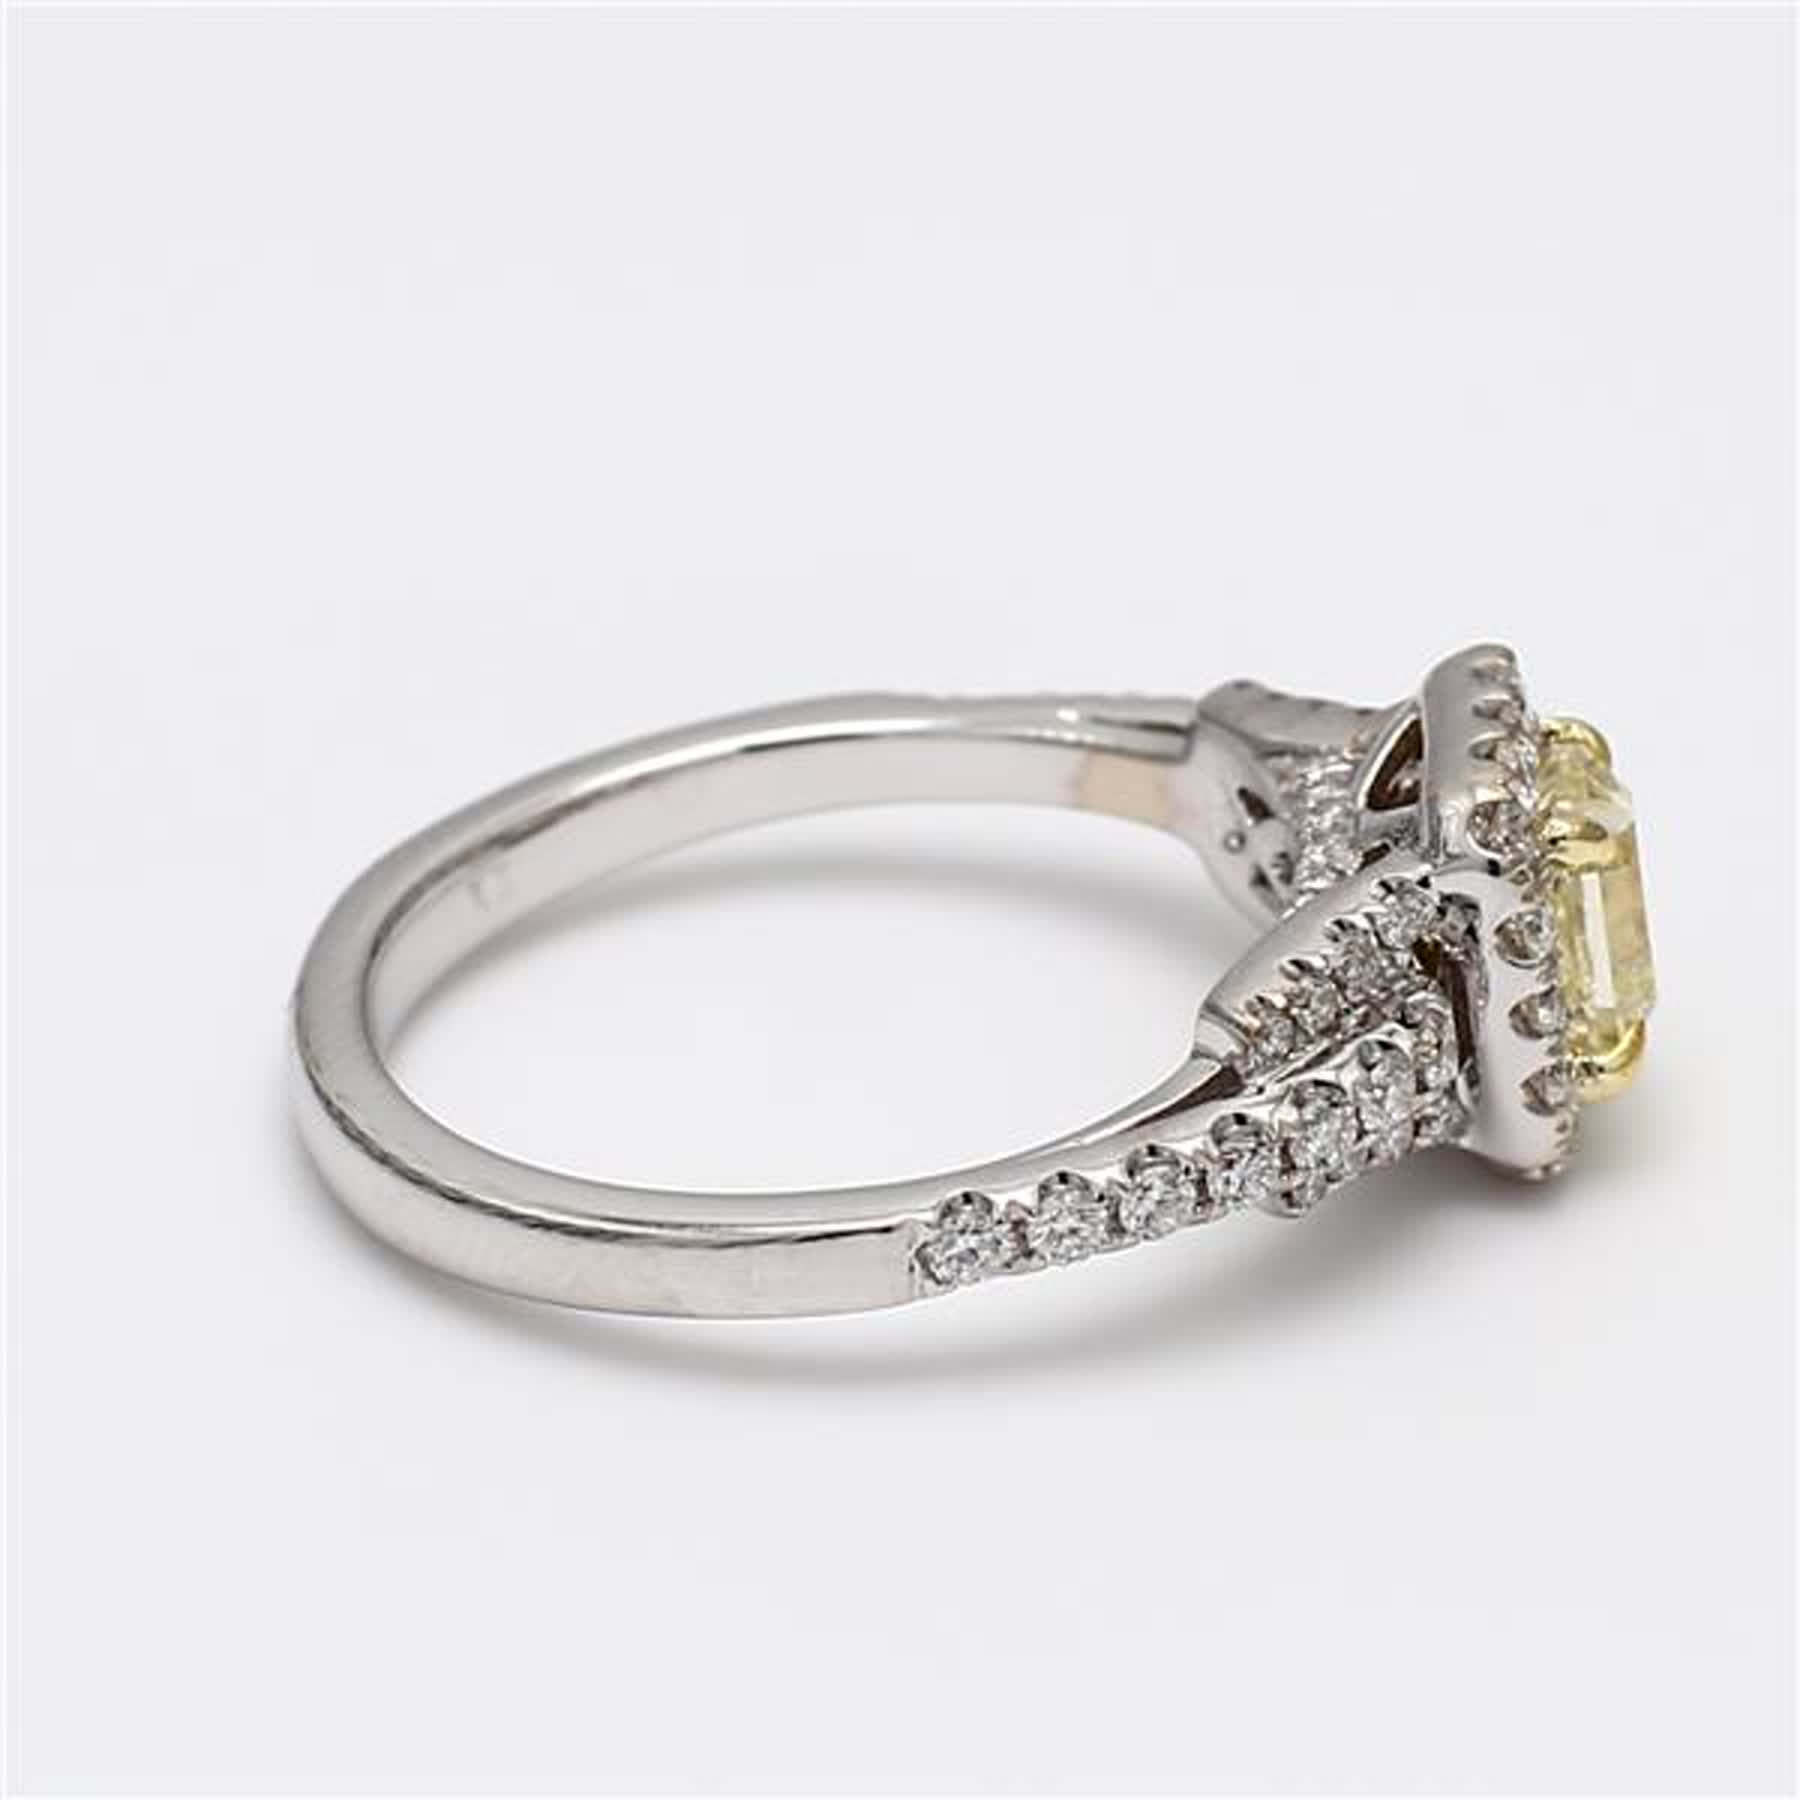 GIA Certified Natural Yellow Radiant and White Diamond 1.22 Carat TW Gold Ring